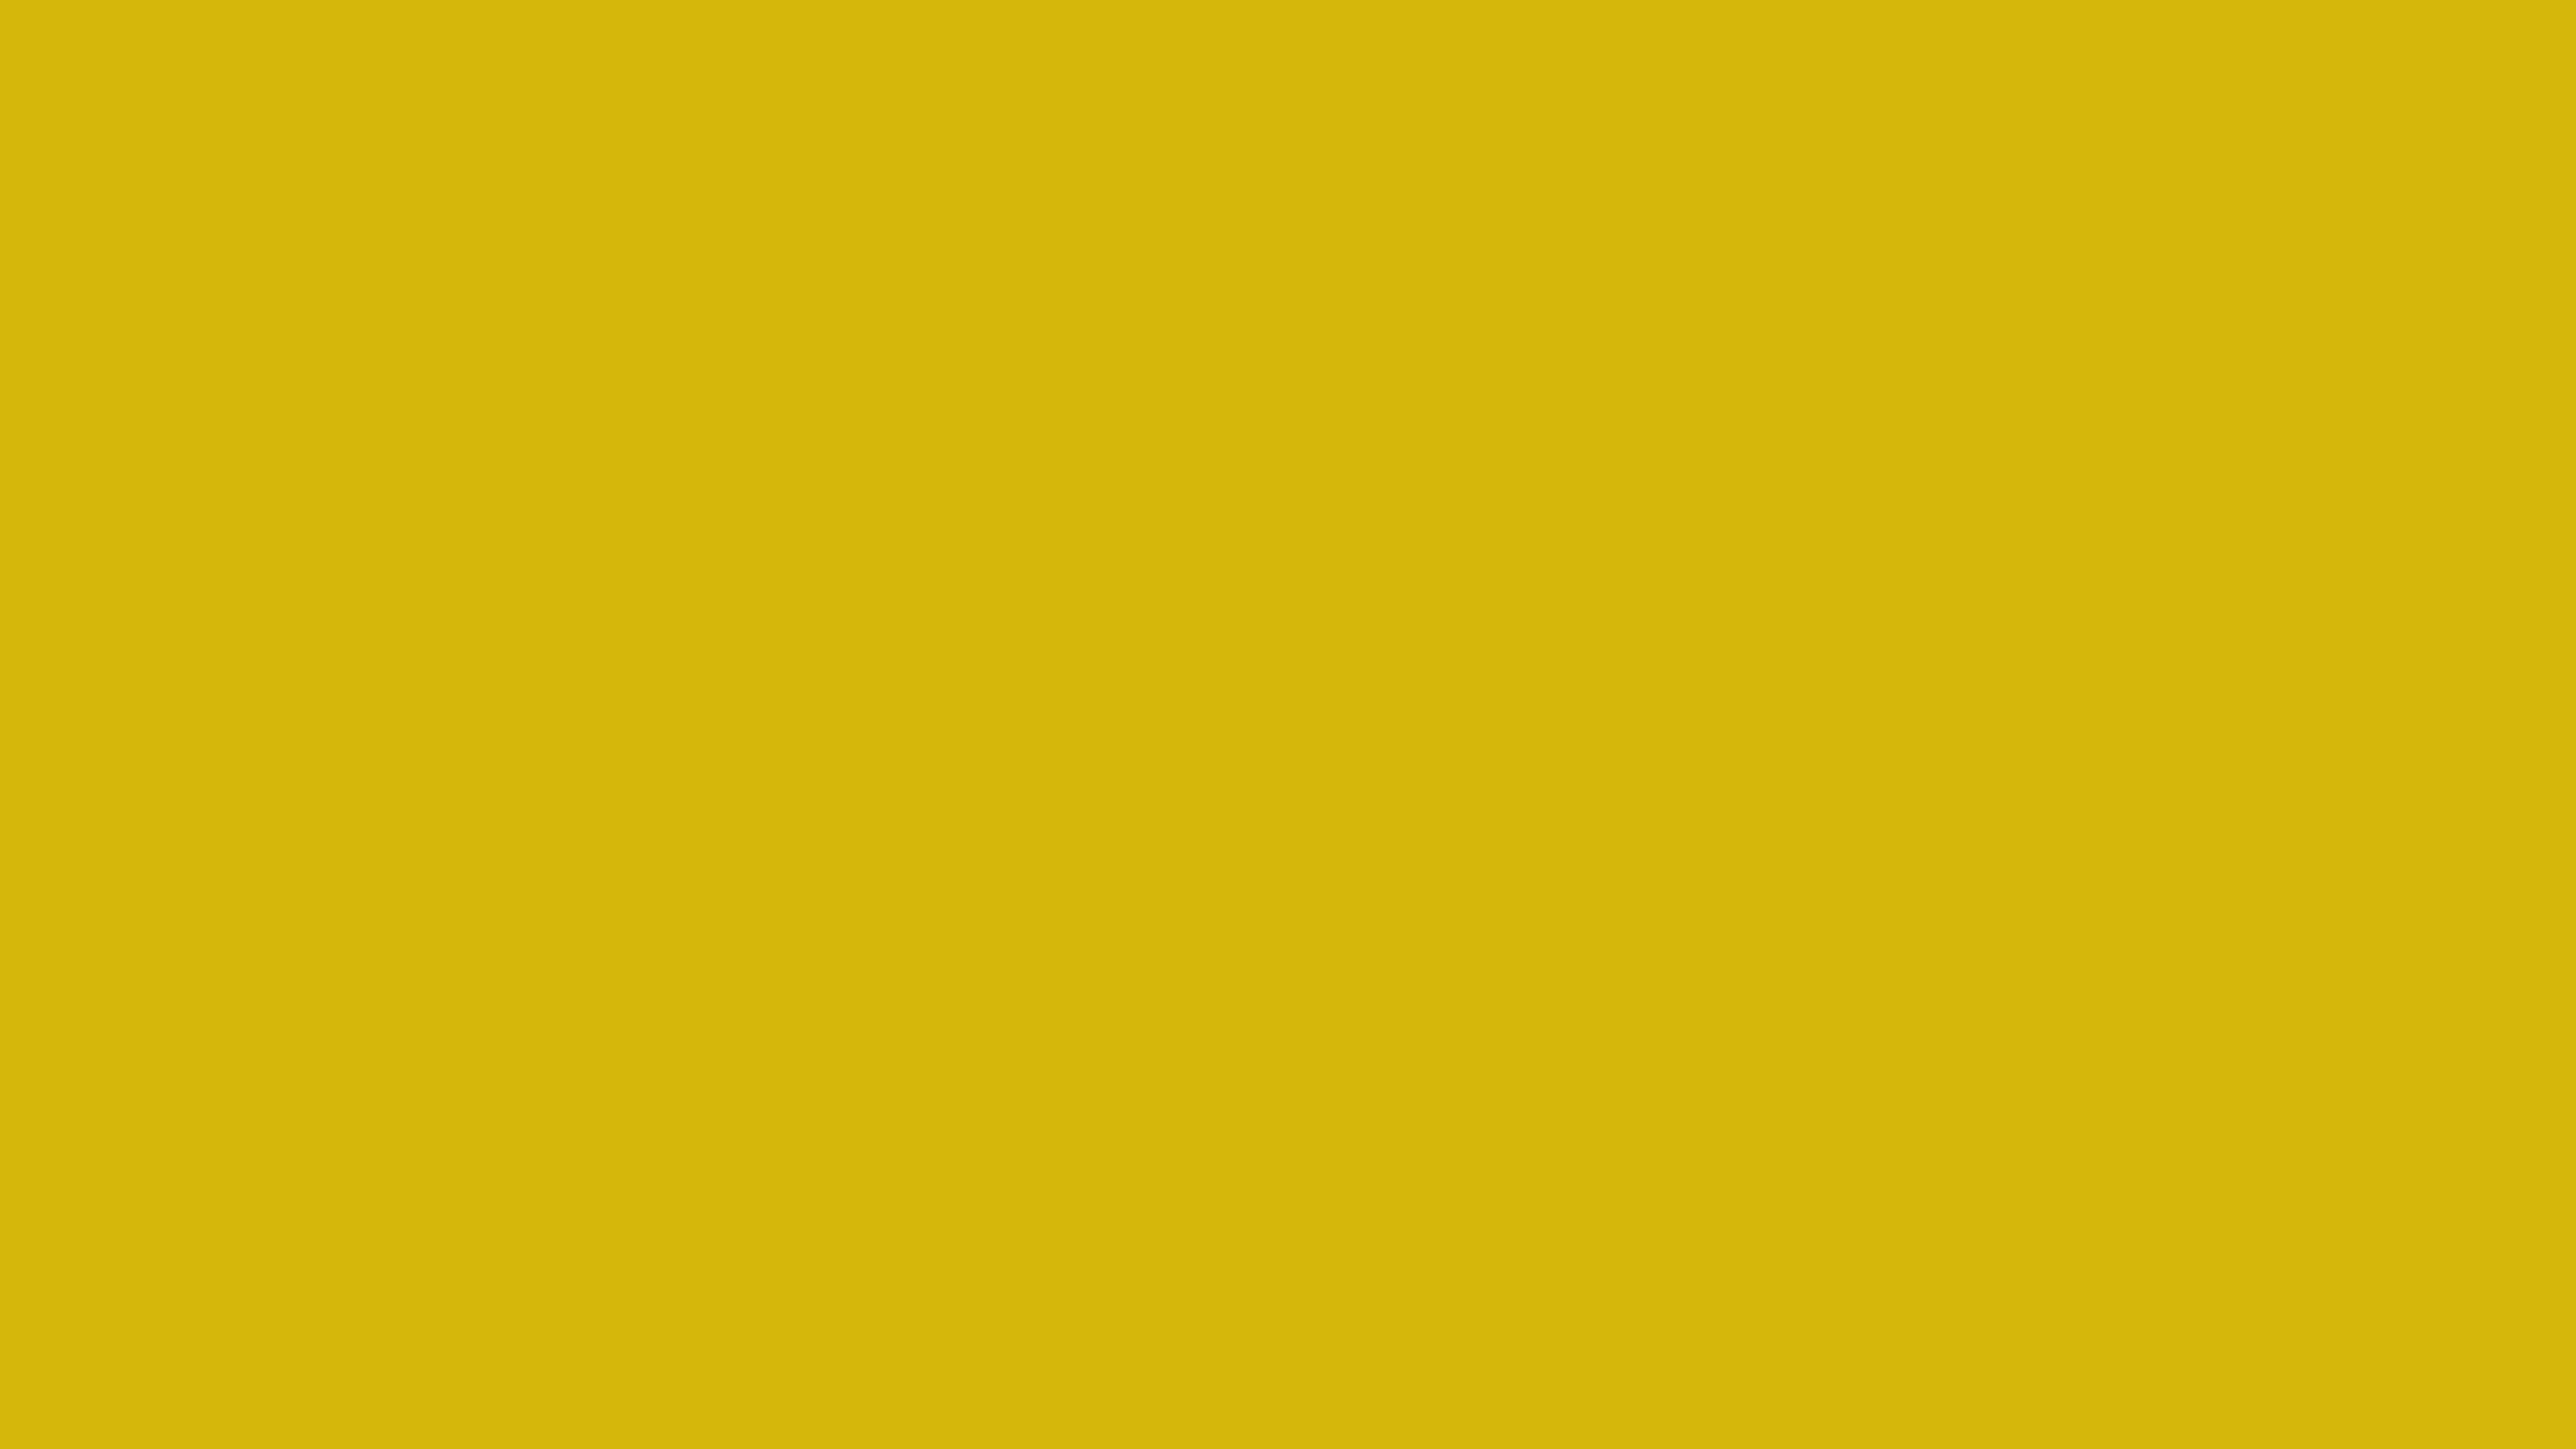 Dark Yellow Solid Color Background Image Free Image Generator